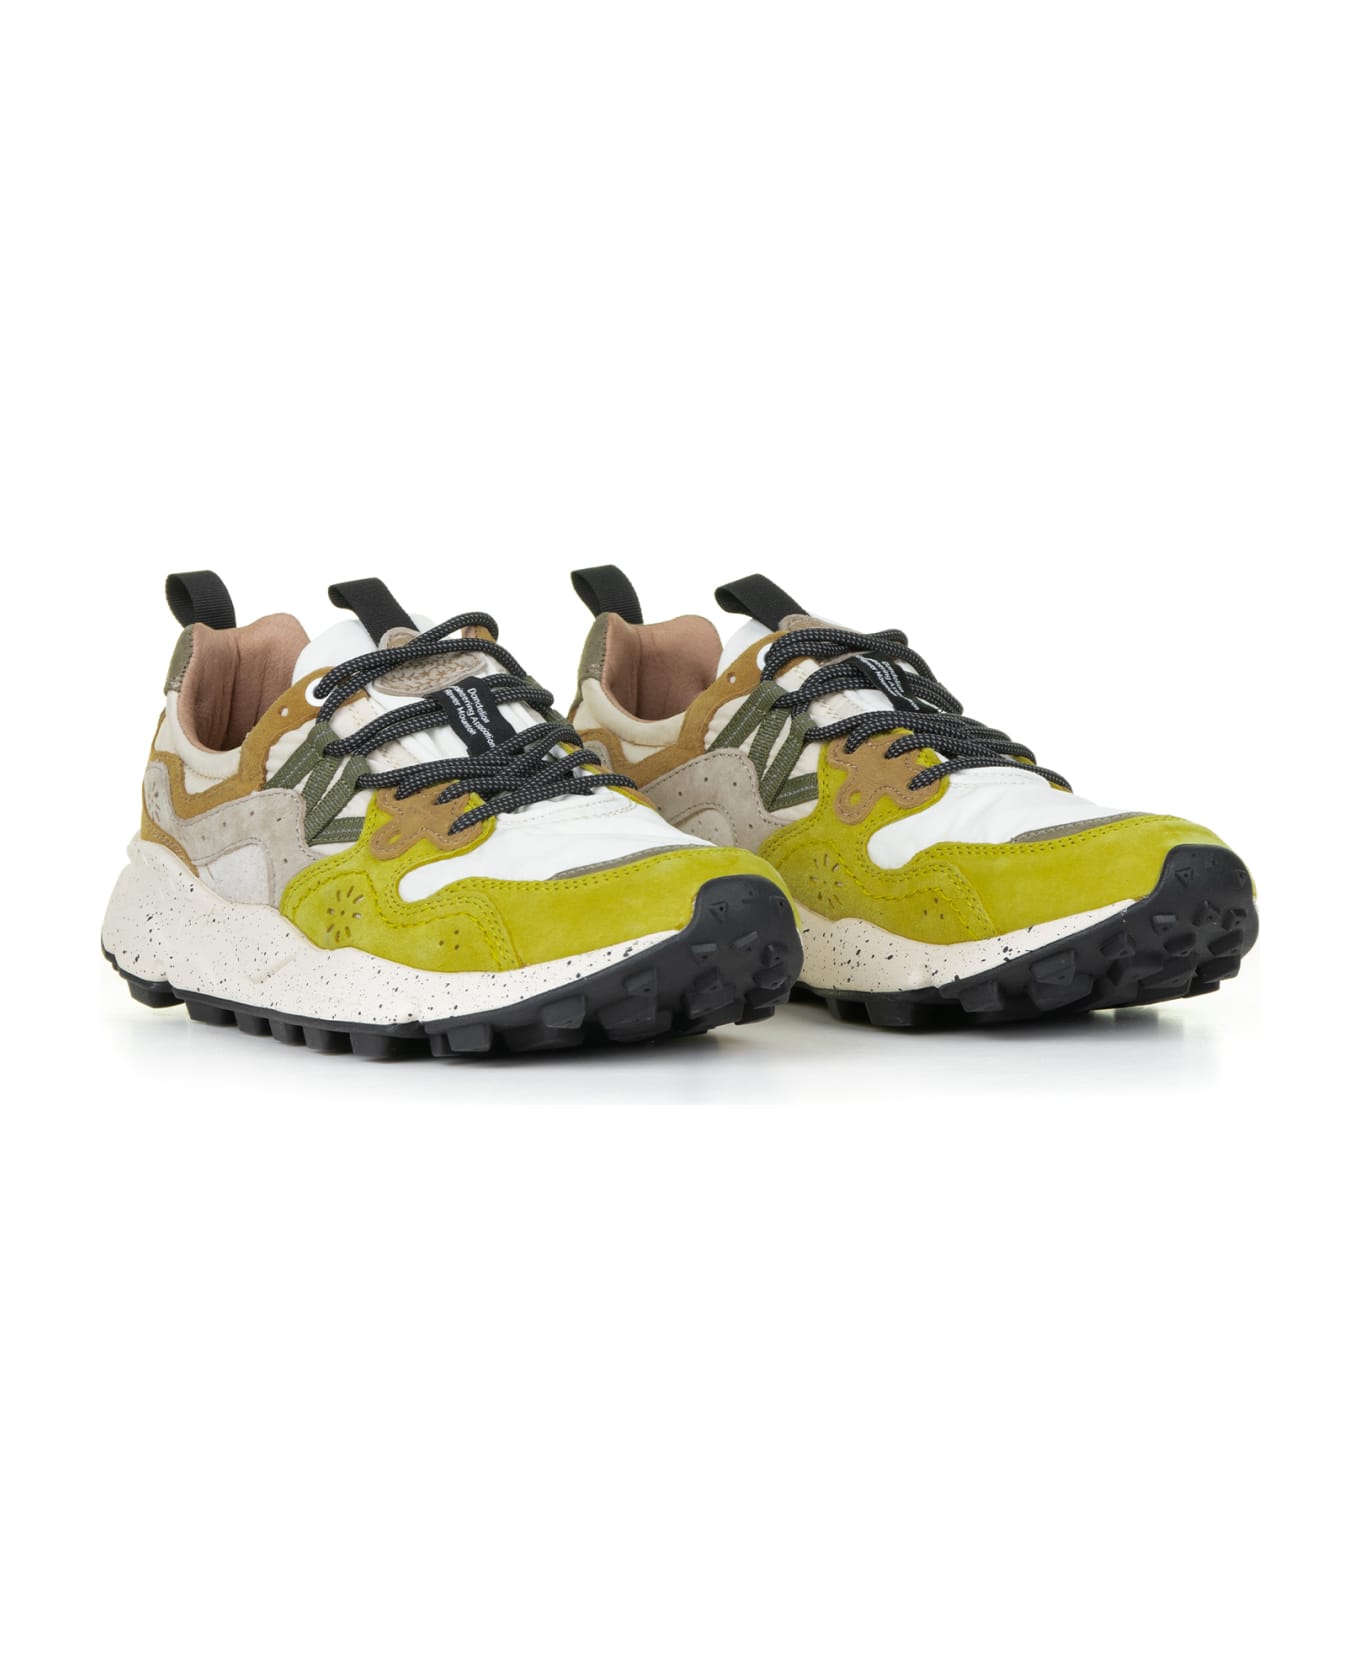 Flower Mountain Yamano Orca Sneakers In Suede And Nylon - OCHER WHITE